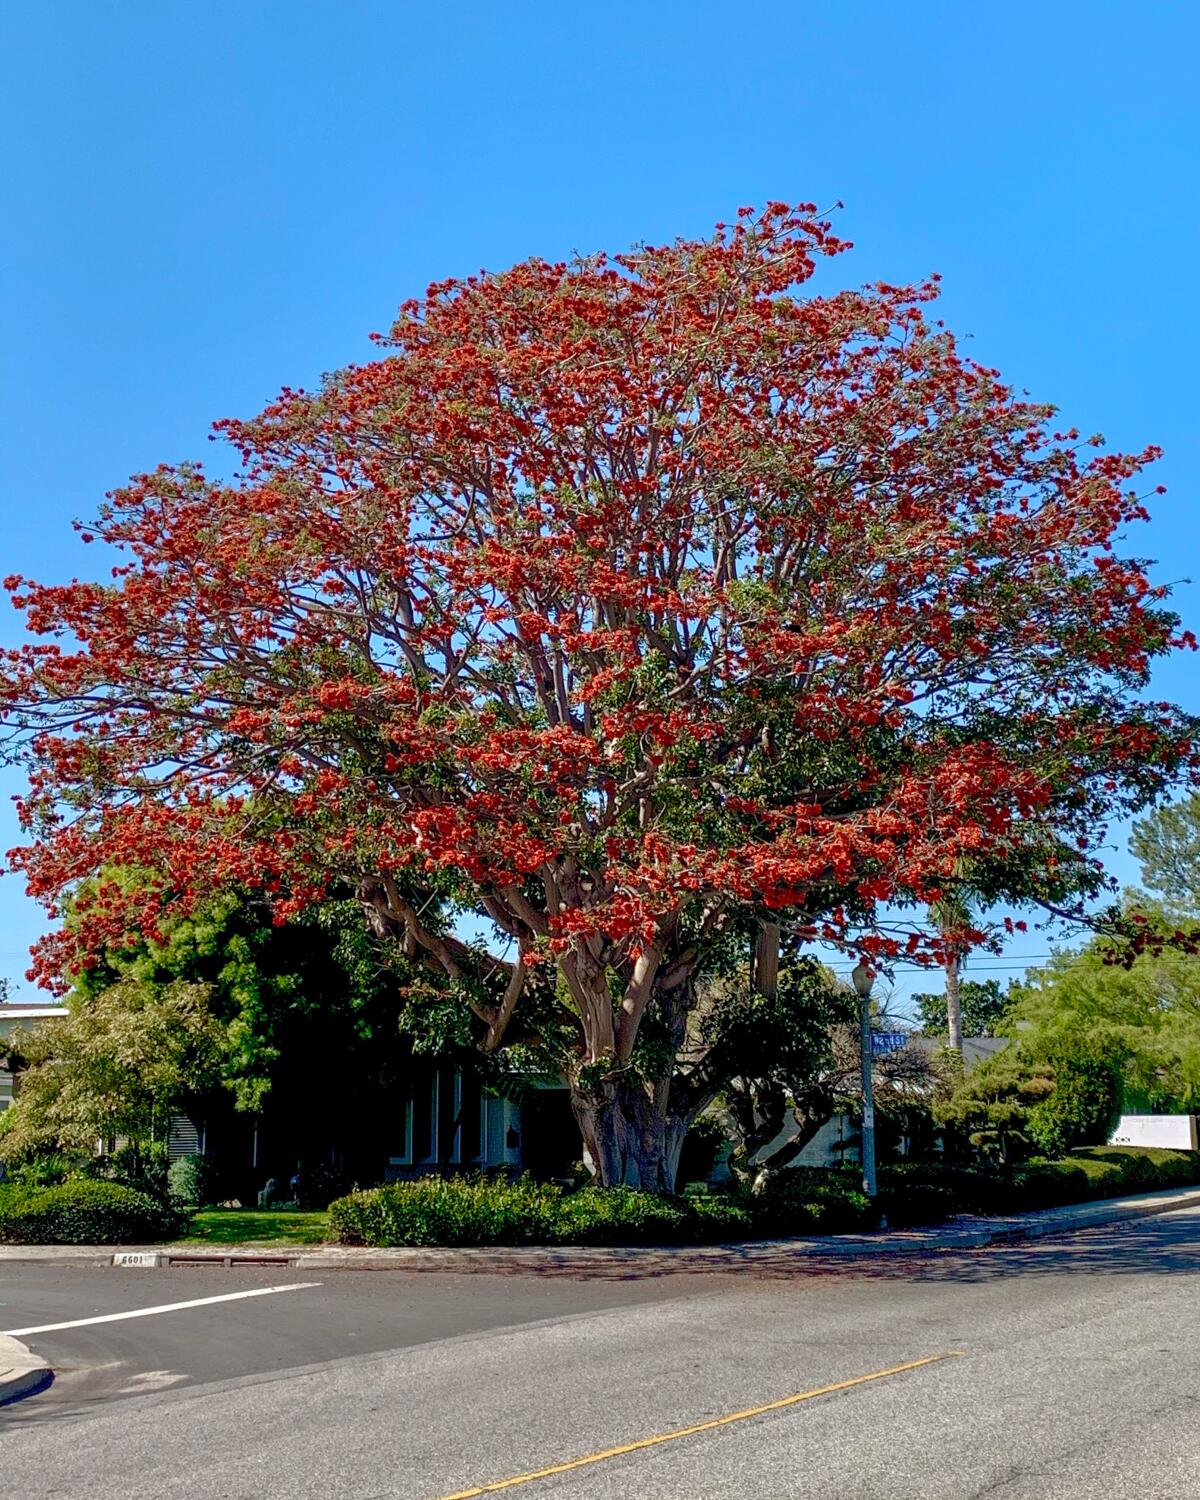 A tree on a corner in a neighborhood, covered with red blooms.